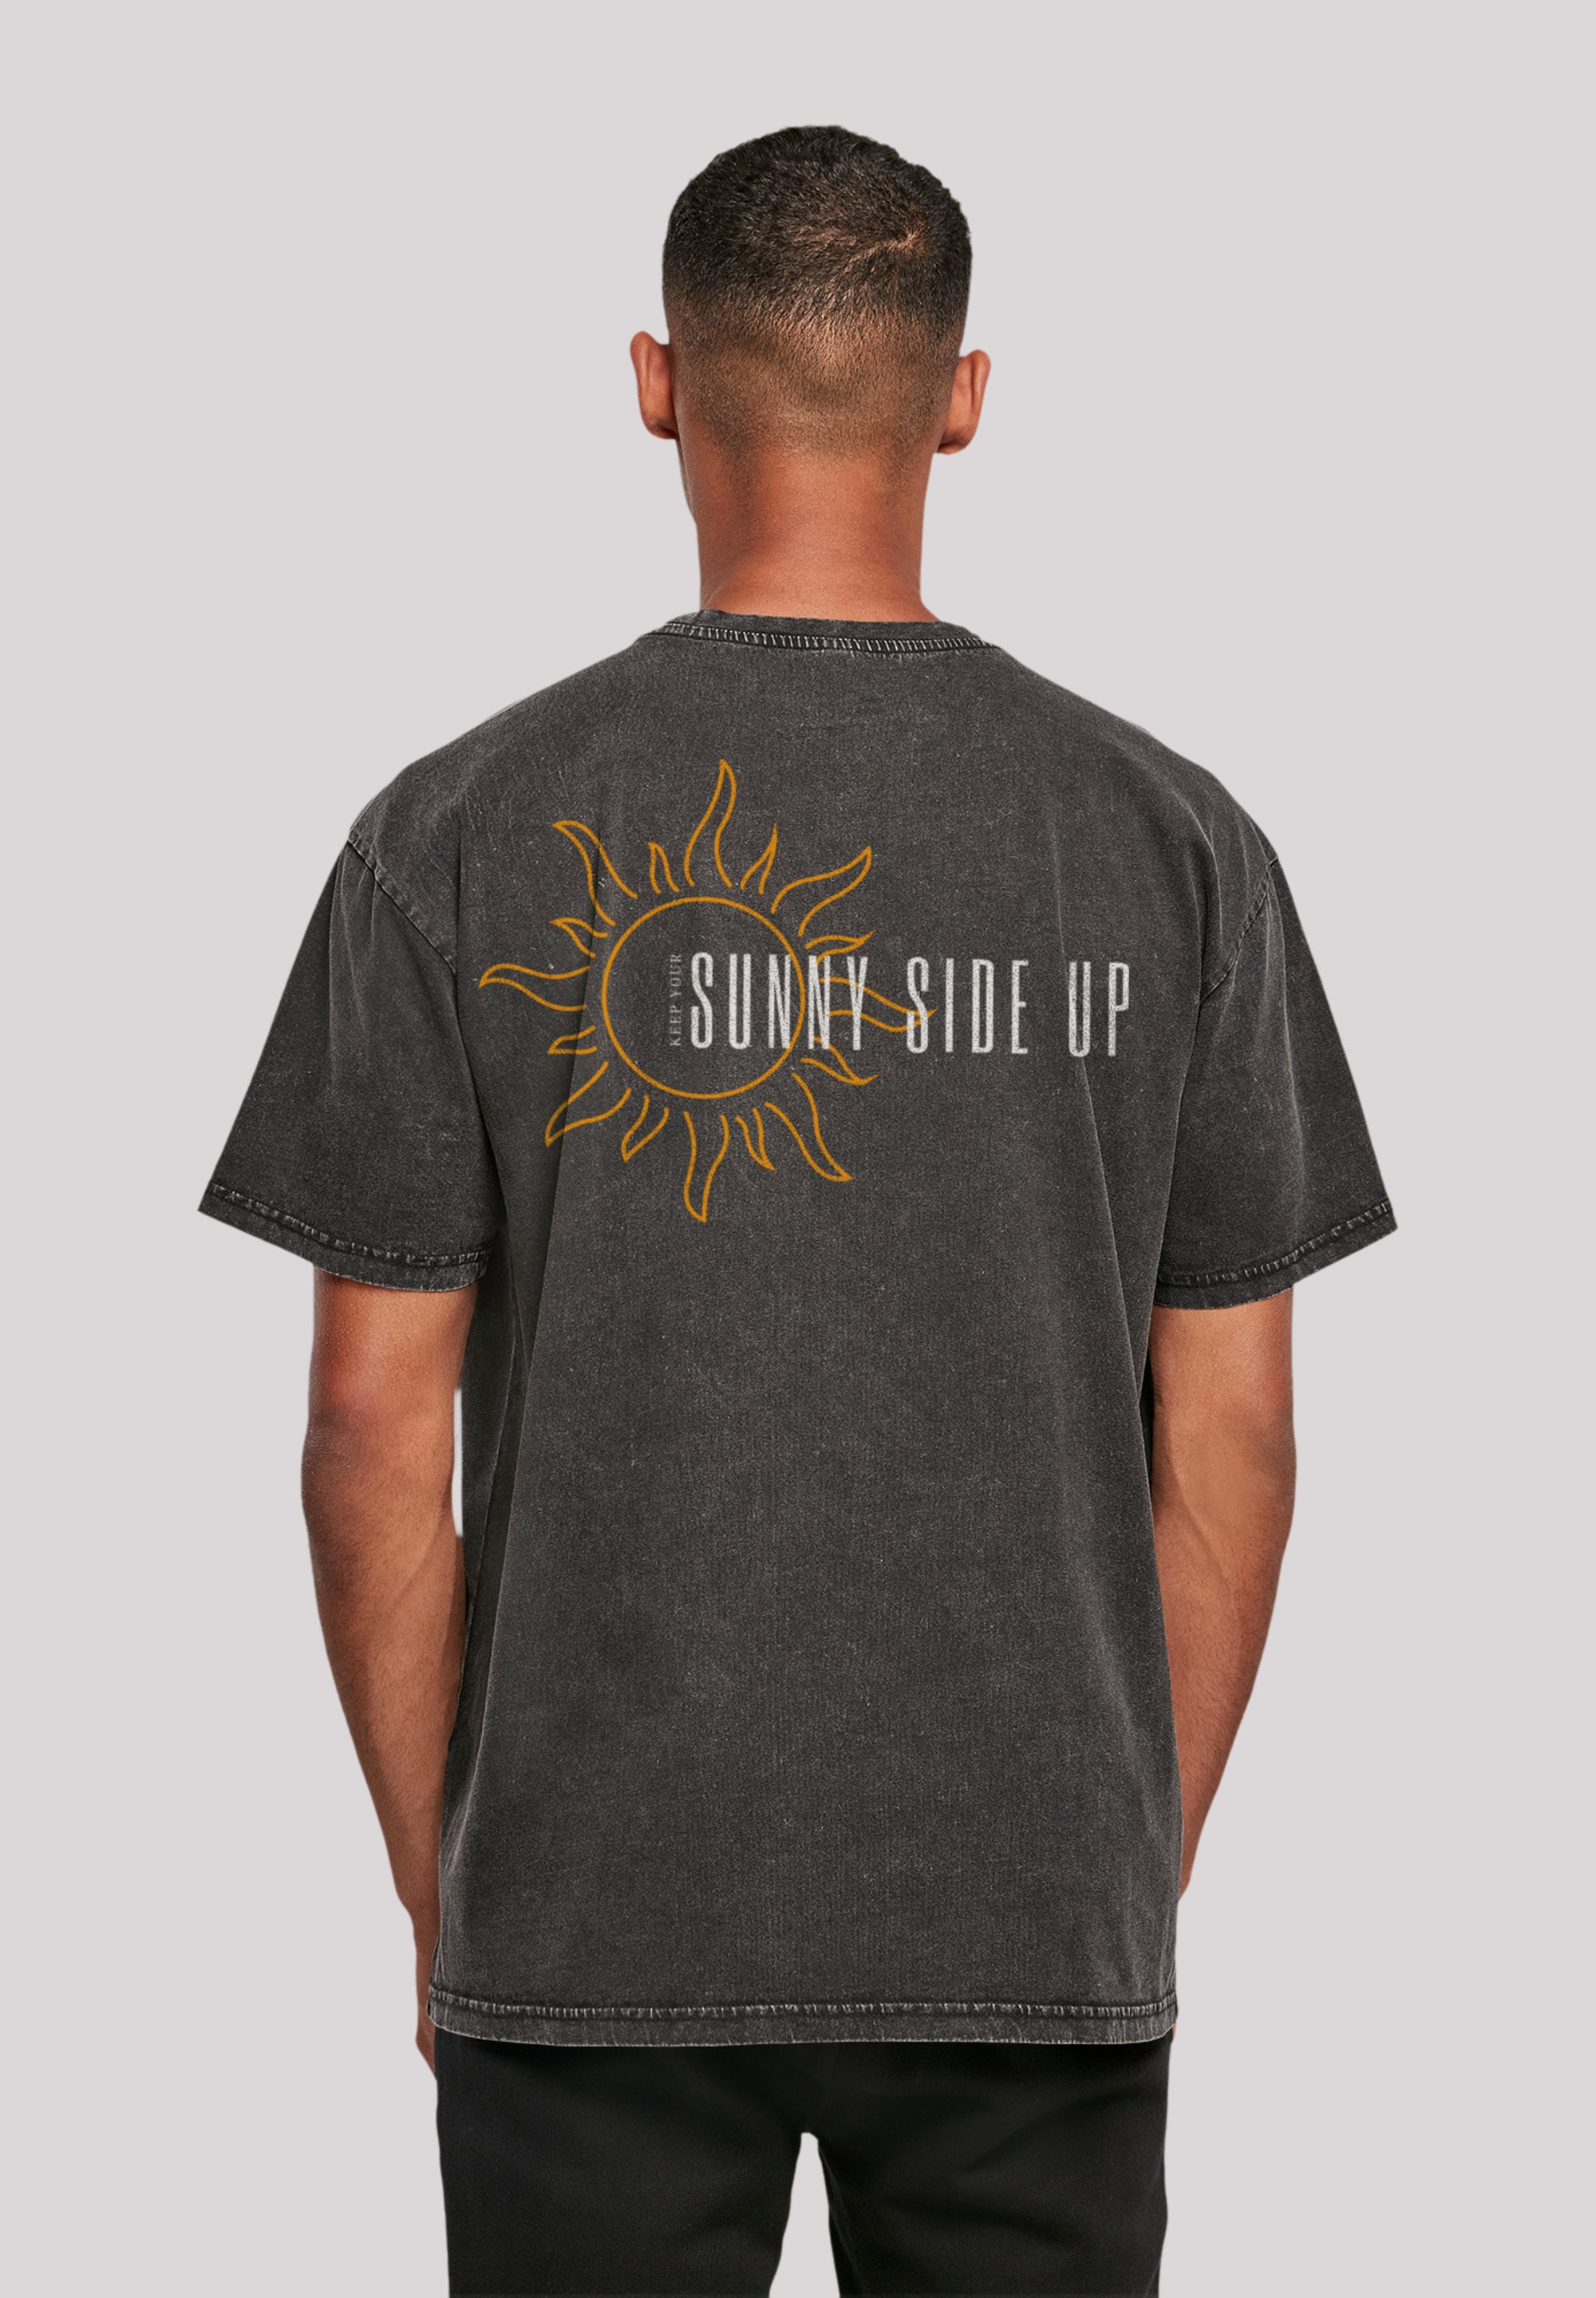 T-Shirt »Sunny side up«, Print